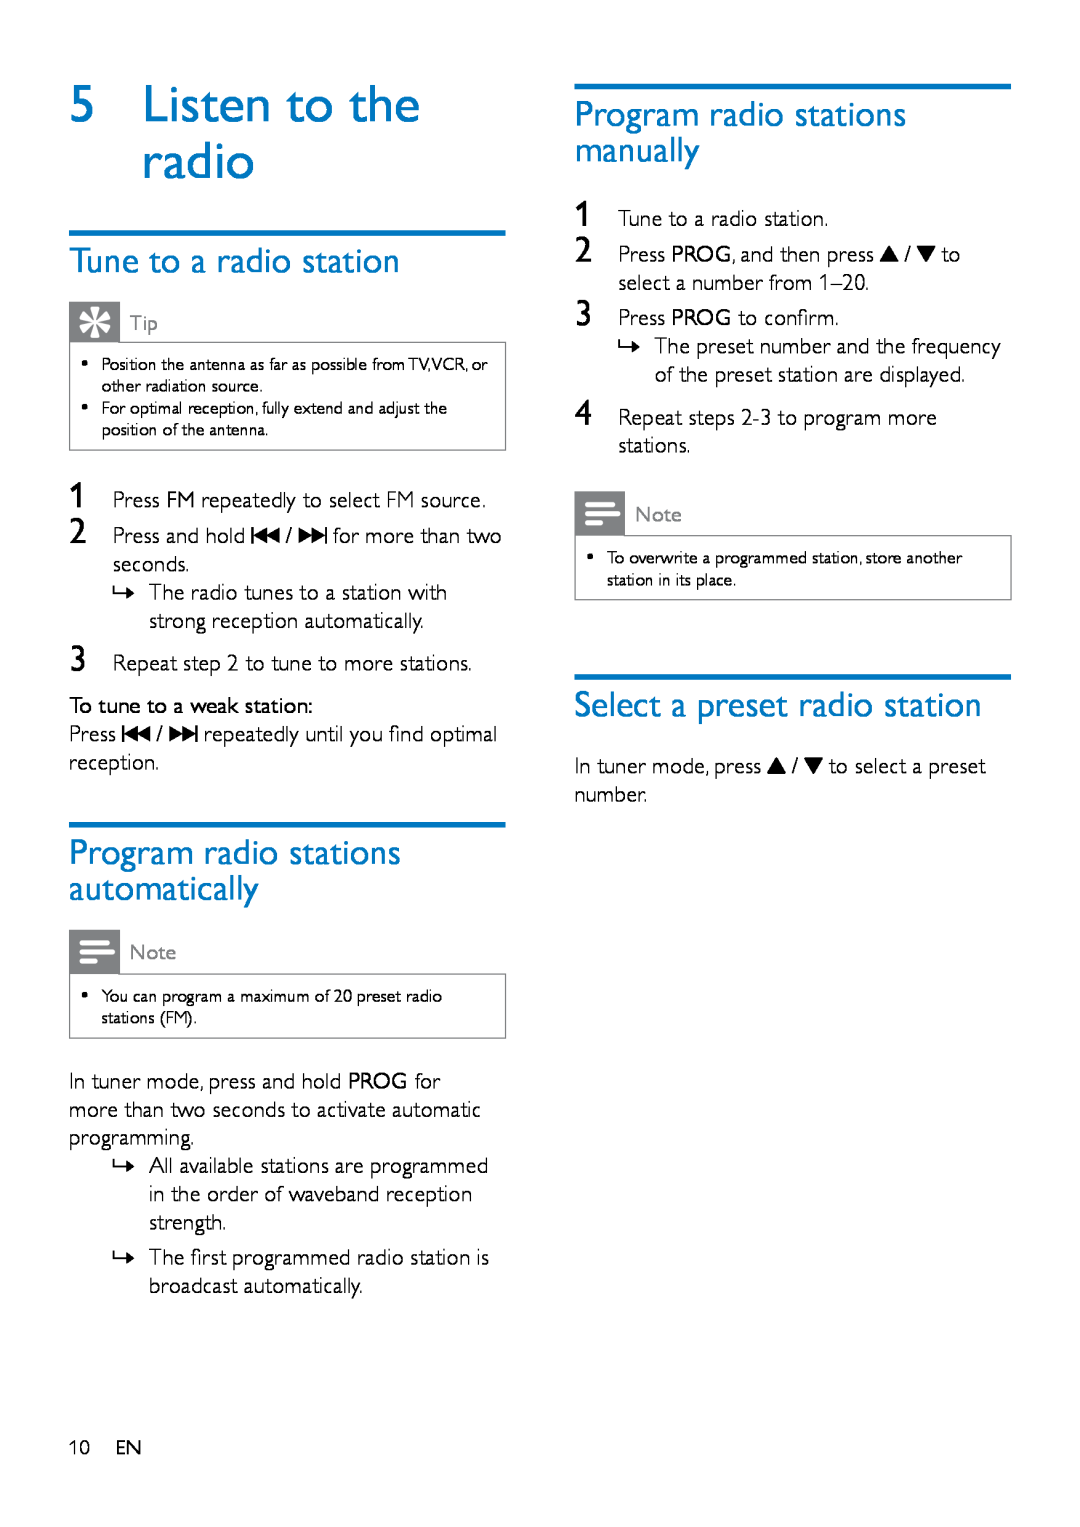 Philips MCM2150 user manual Listen to the radio, Tune to a radio station, Program radio stations automatically 